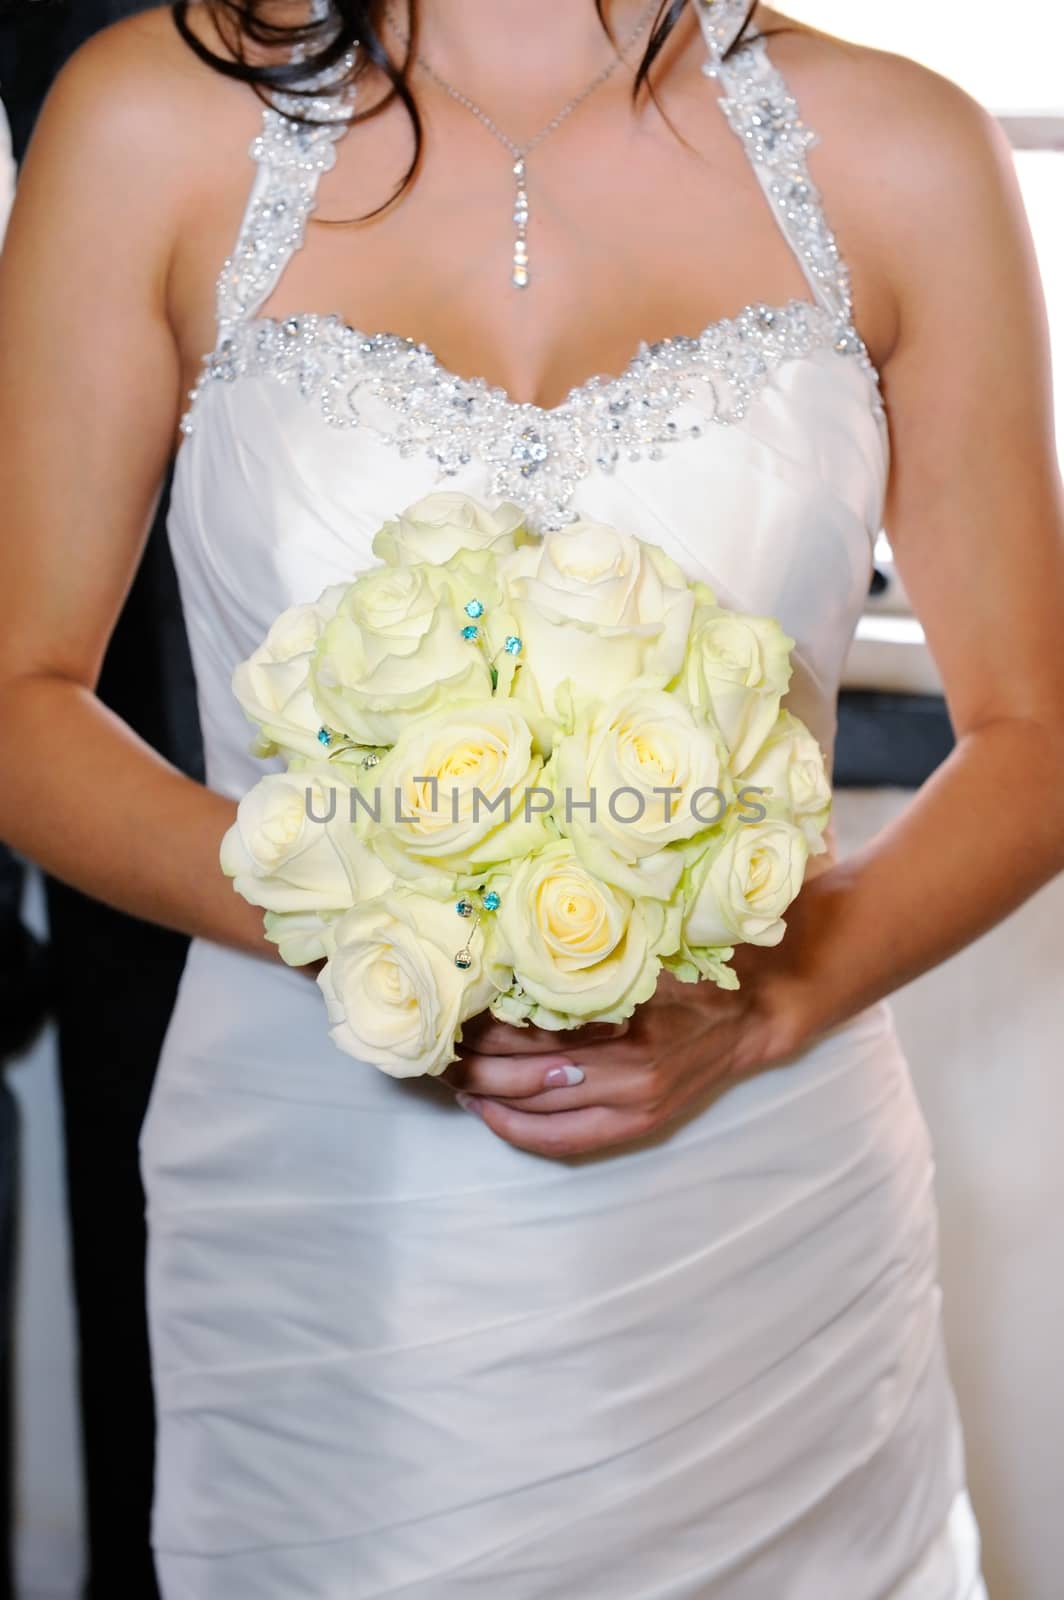 Brides flowers and dress detail by kmwphotography